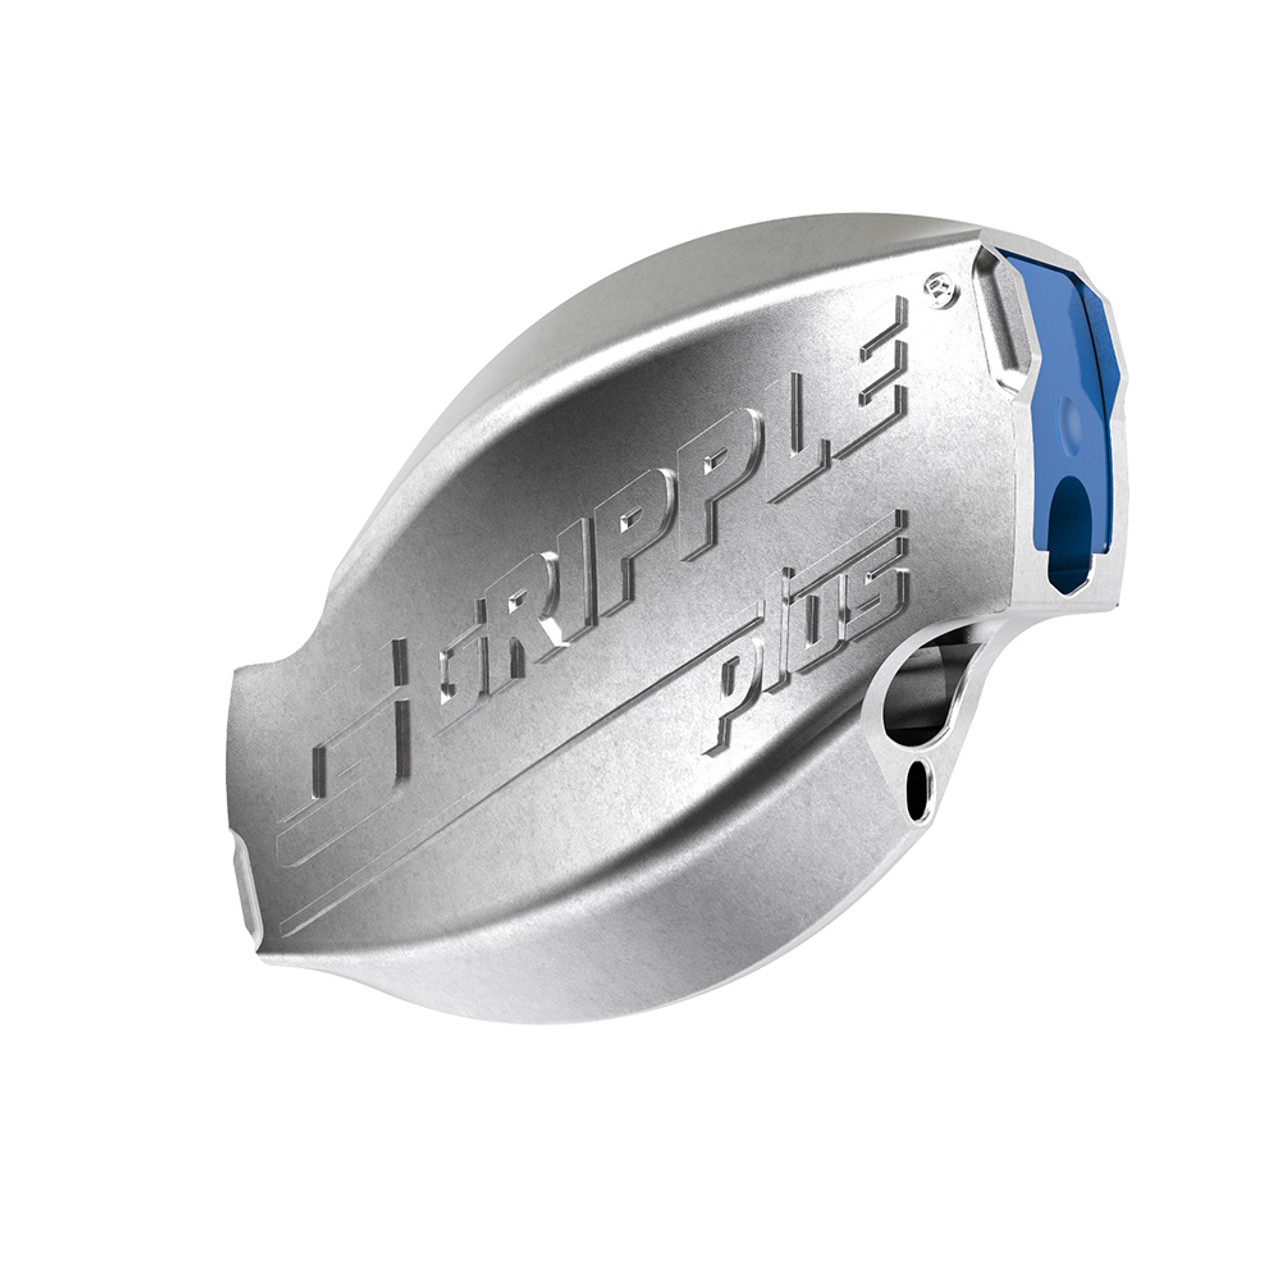 Gripple is the ultimate hi-tensile wire joiner.  Simply insert the wire(s) into the gripple and tension as desired.